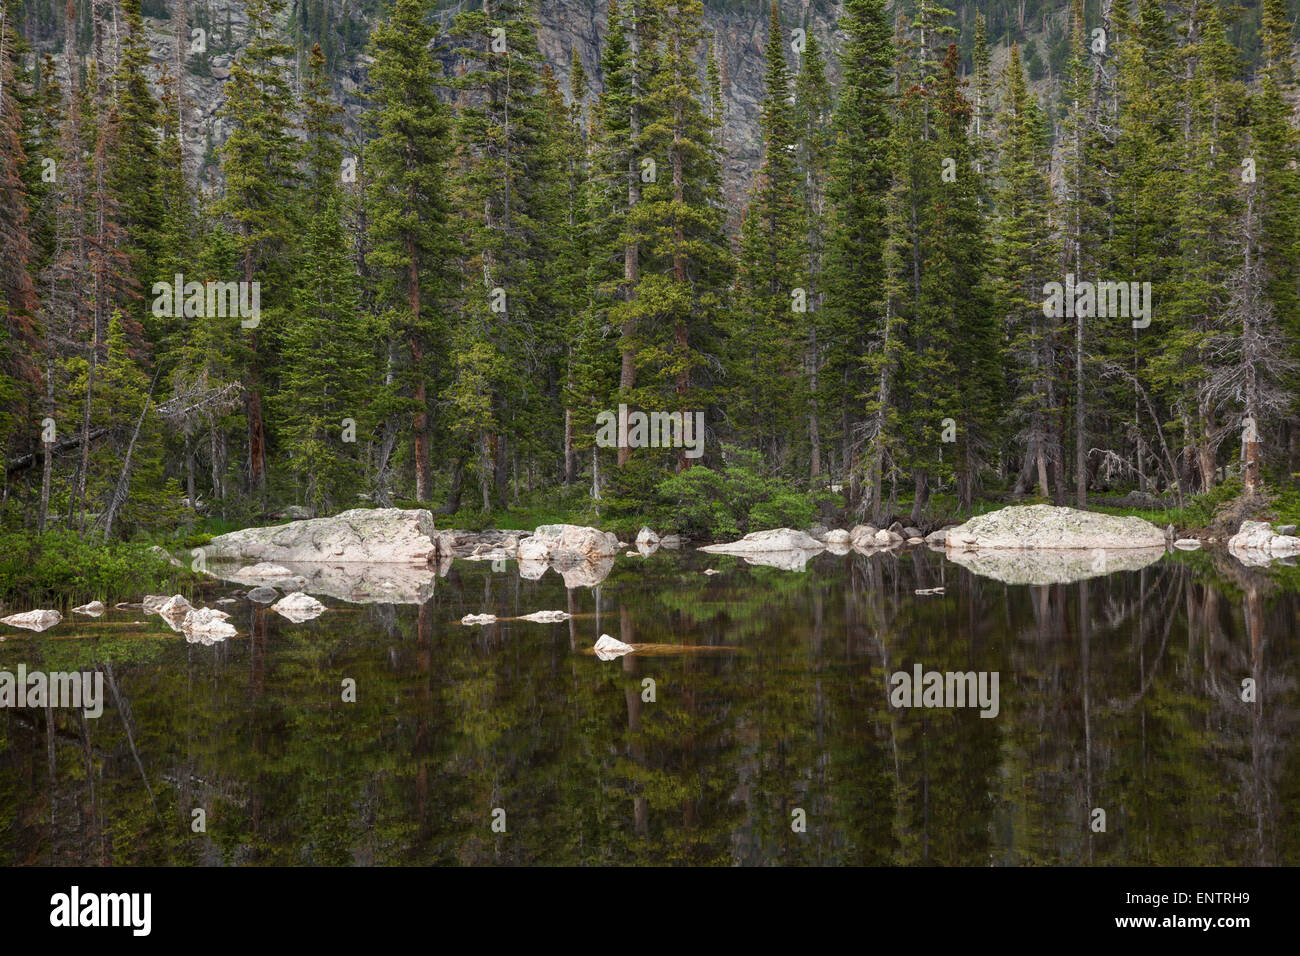 Boulders and conifers on the shore of Chipmunk Lake, Rocky Mountain National Park, Colorado. Stock Photo